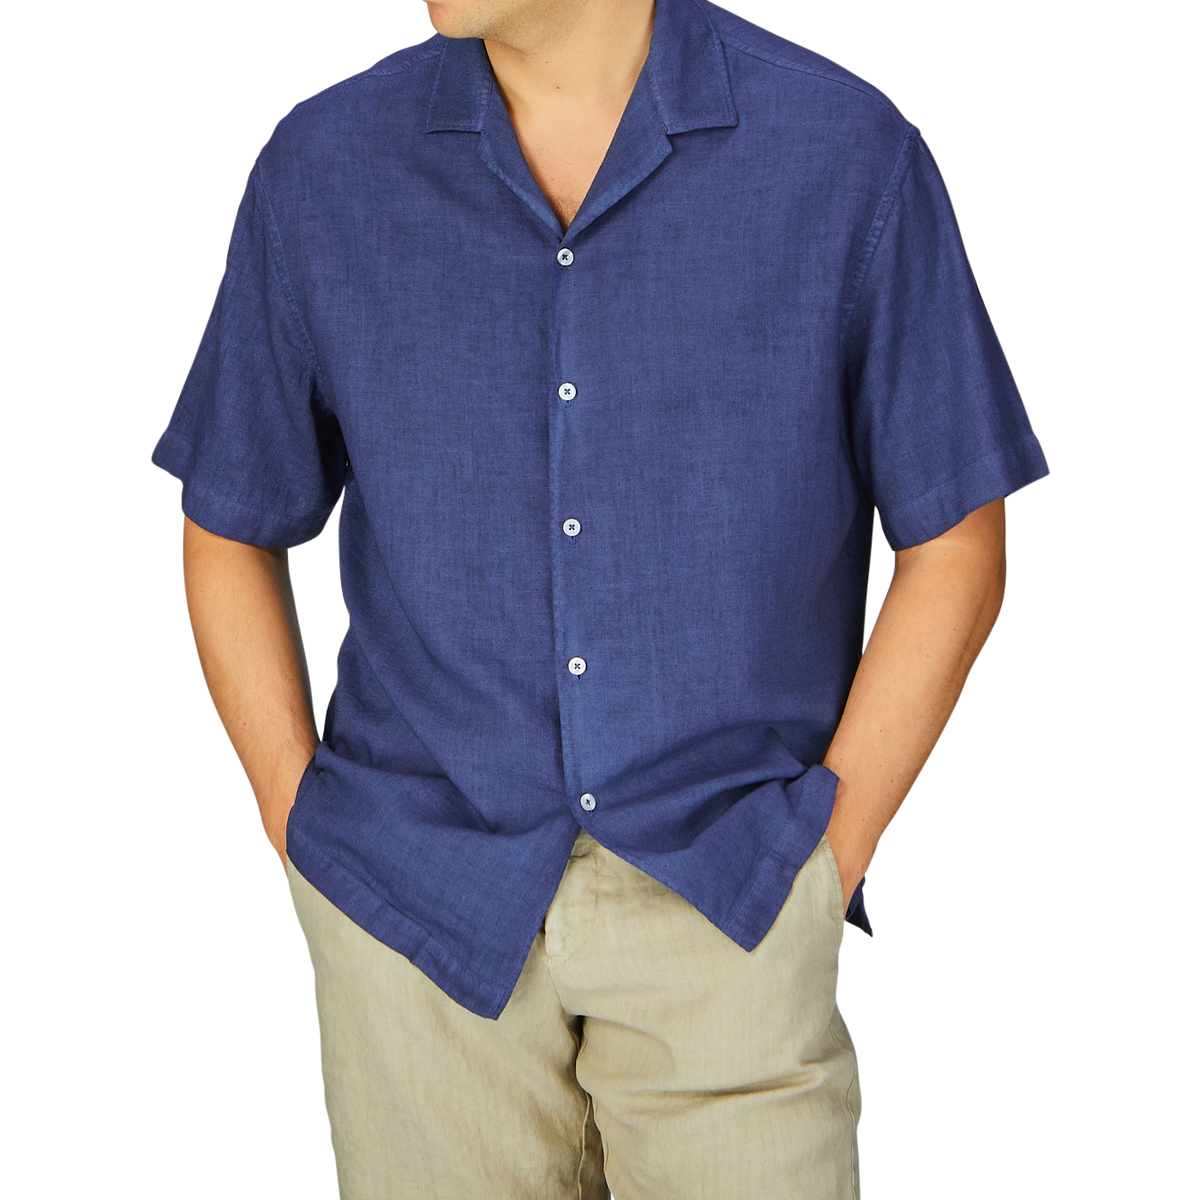 Man in a Dark Blue Linen Blend Open Collar Shirt and beige pants with hands in pockets, embodying a summer essential look by Altea.